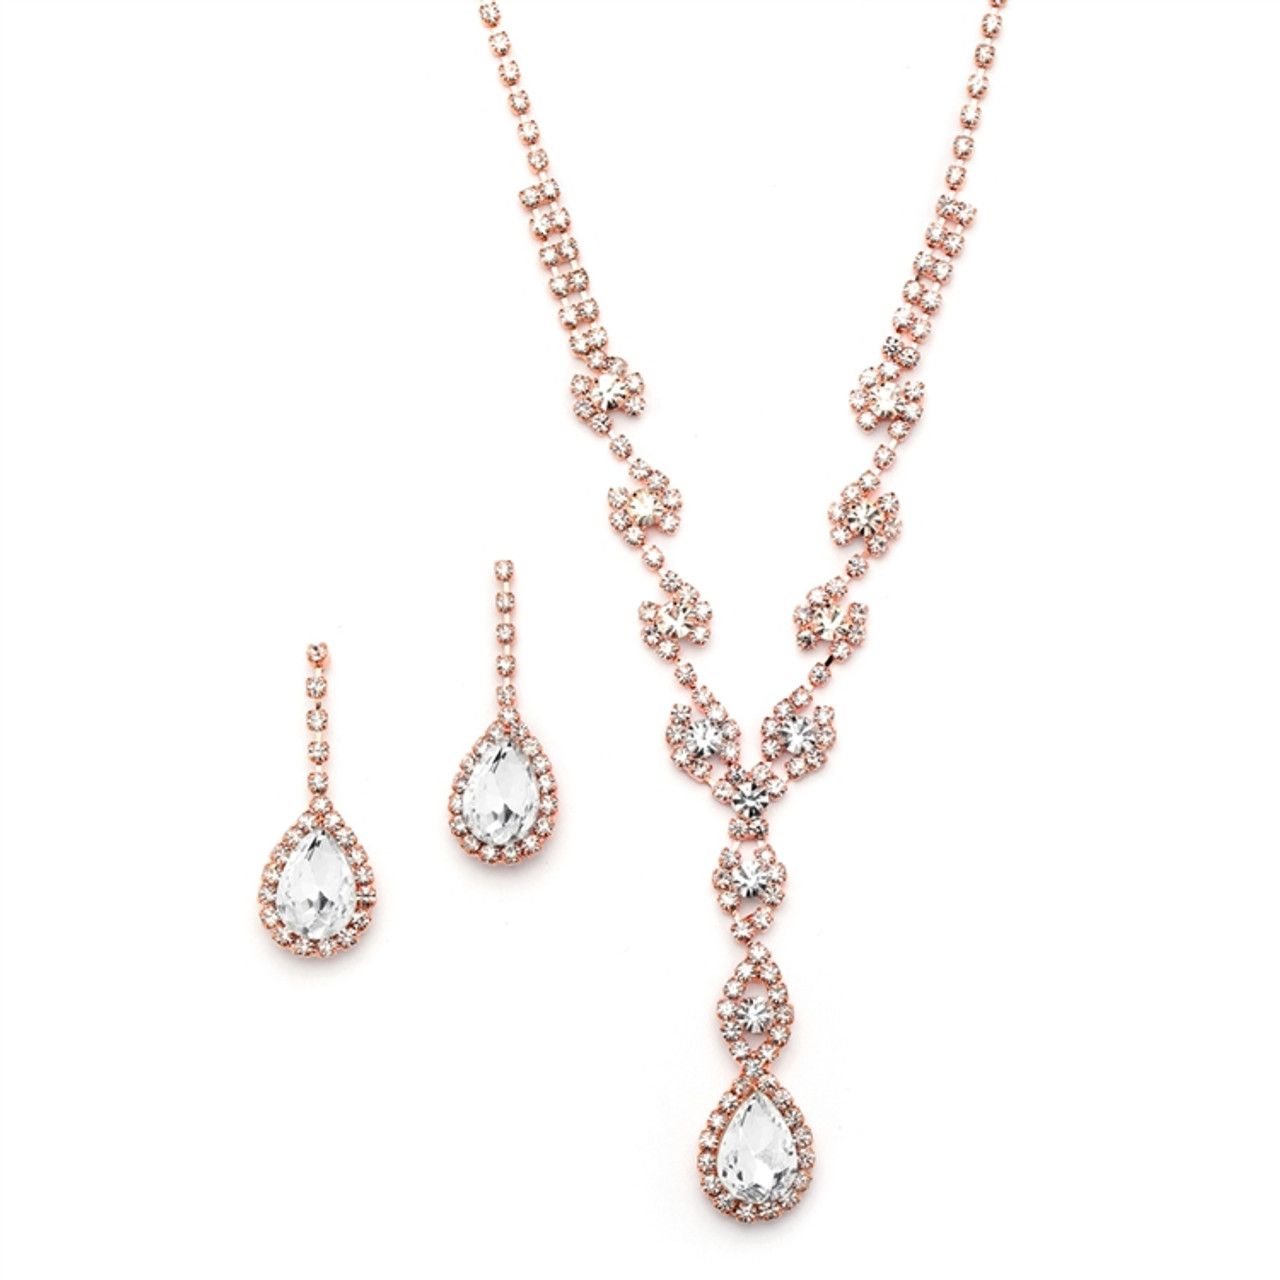 Mariell Dramatic Rhinestone Prom or Wedding Necklace Set with Pear Drops 4231S-RG